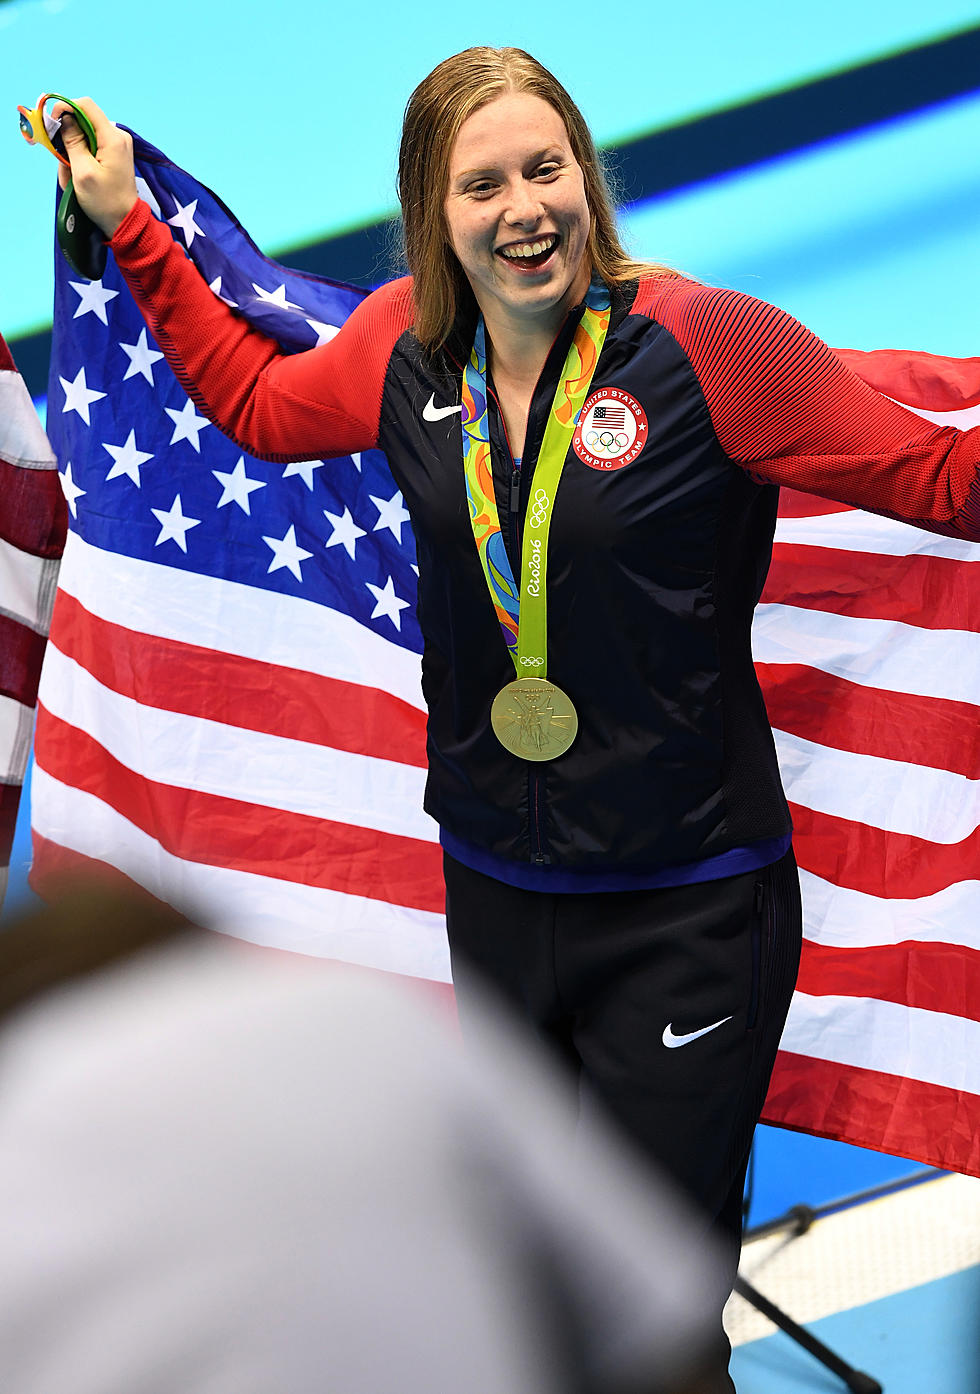 Lilly King Had an Epic Clapback About Evansville on Twitter